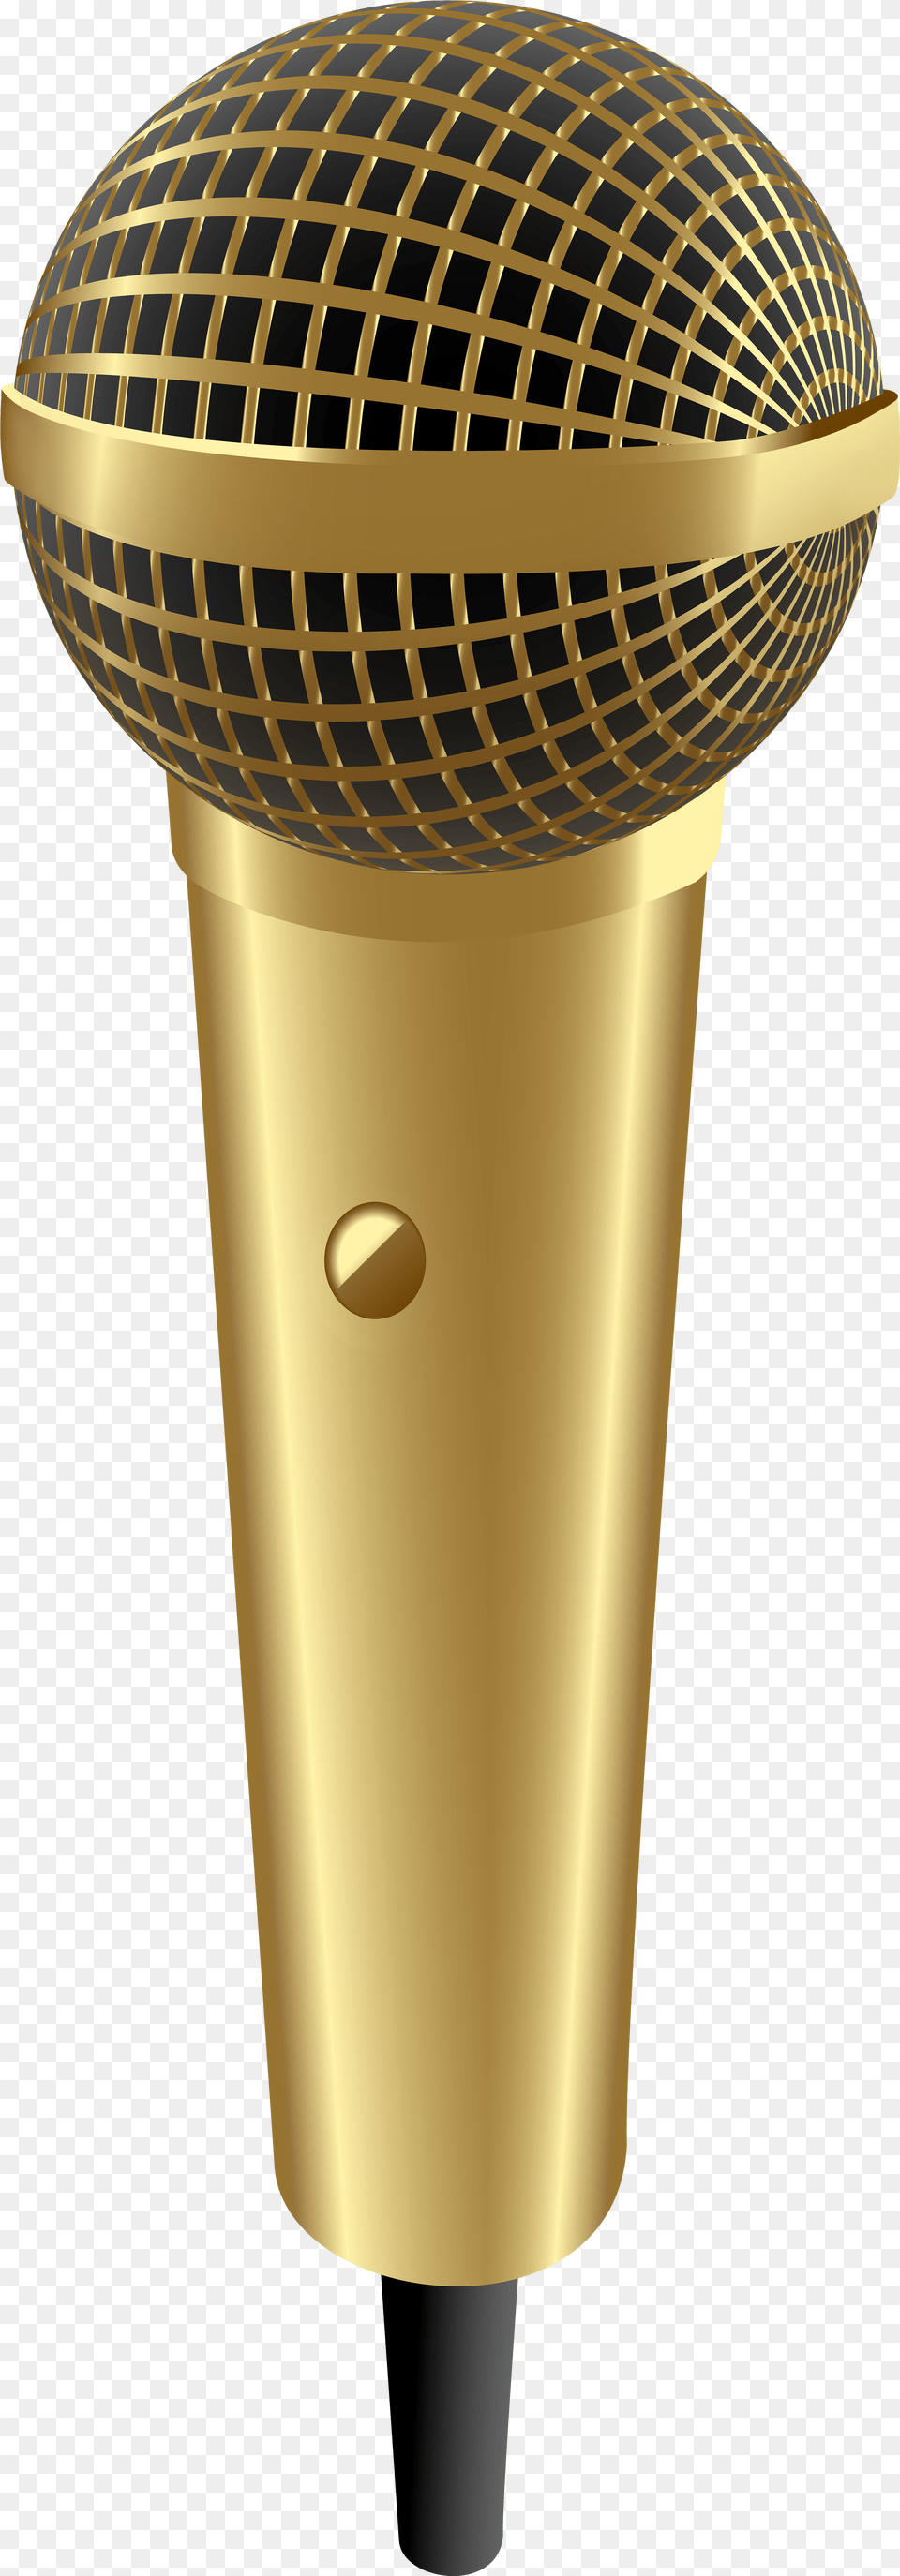 Background Microphone Clipart Gold Microphone Clipart Background Free Png Download